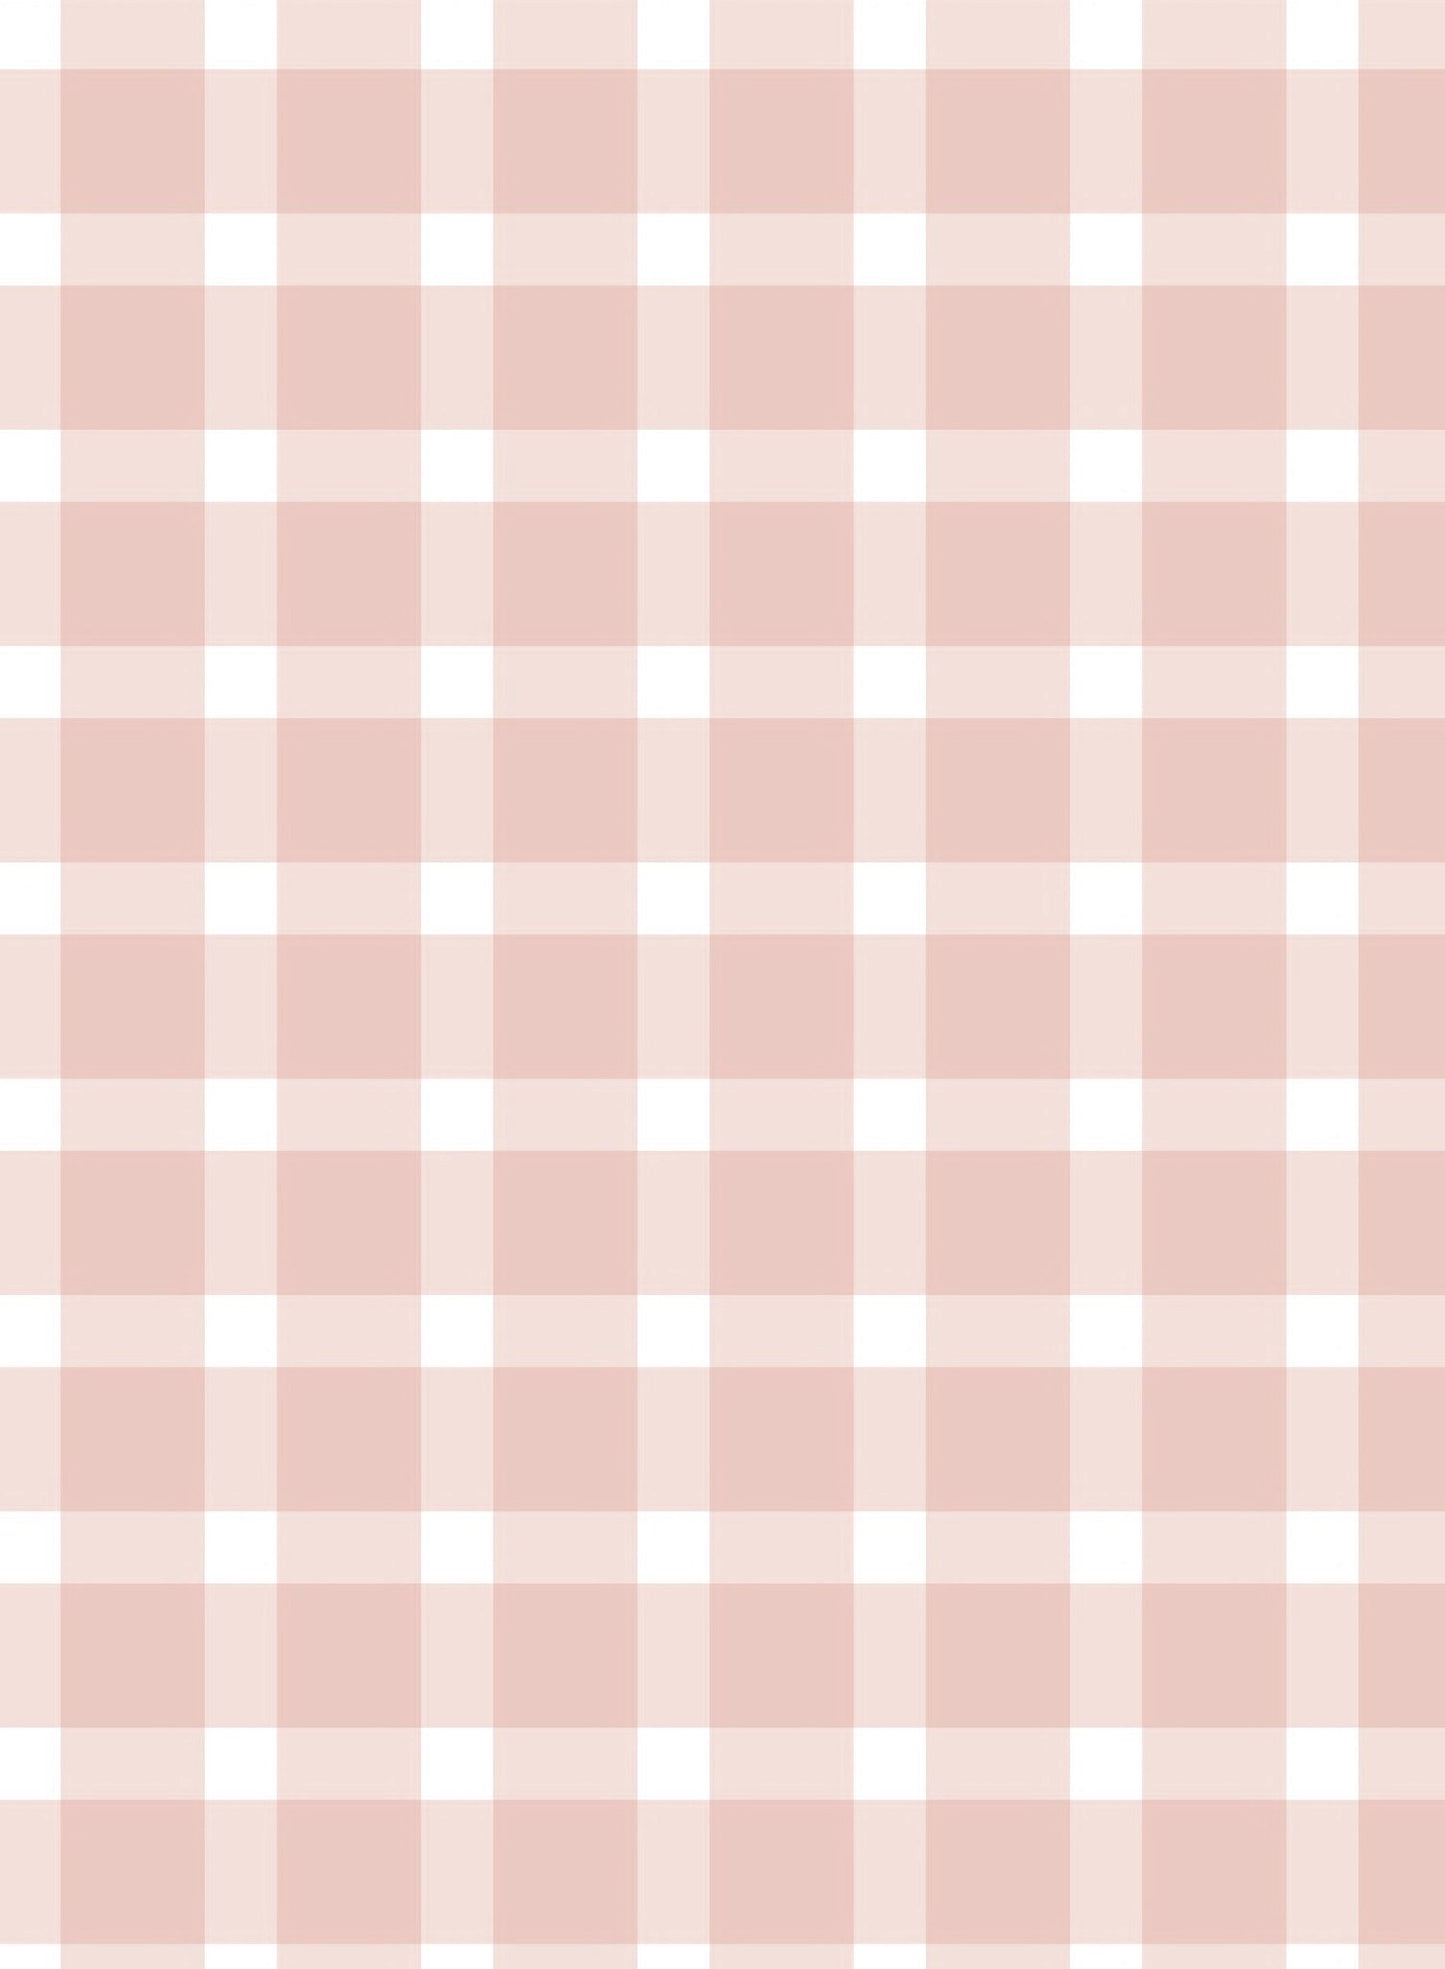 Dorothy is a minimalist wallpaper by Opposite Wall of a soft pastel checkered pattern.